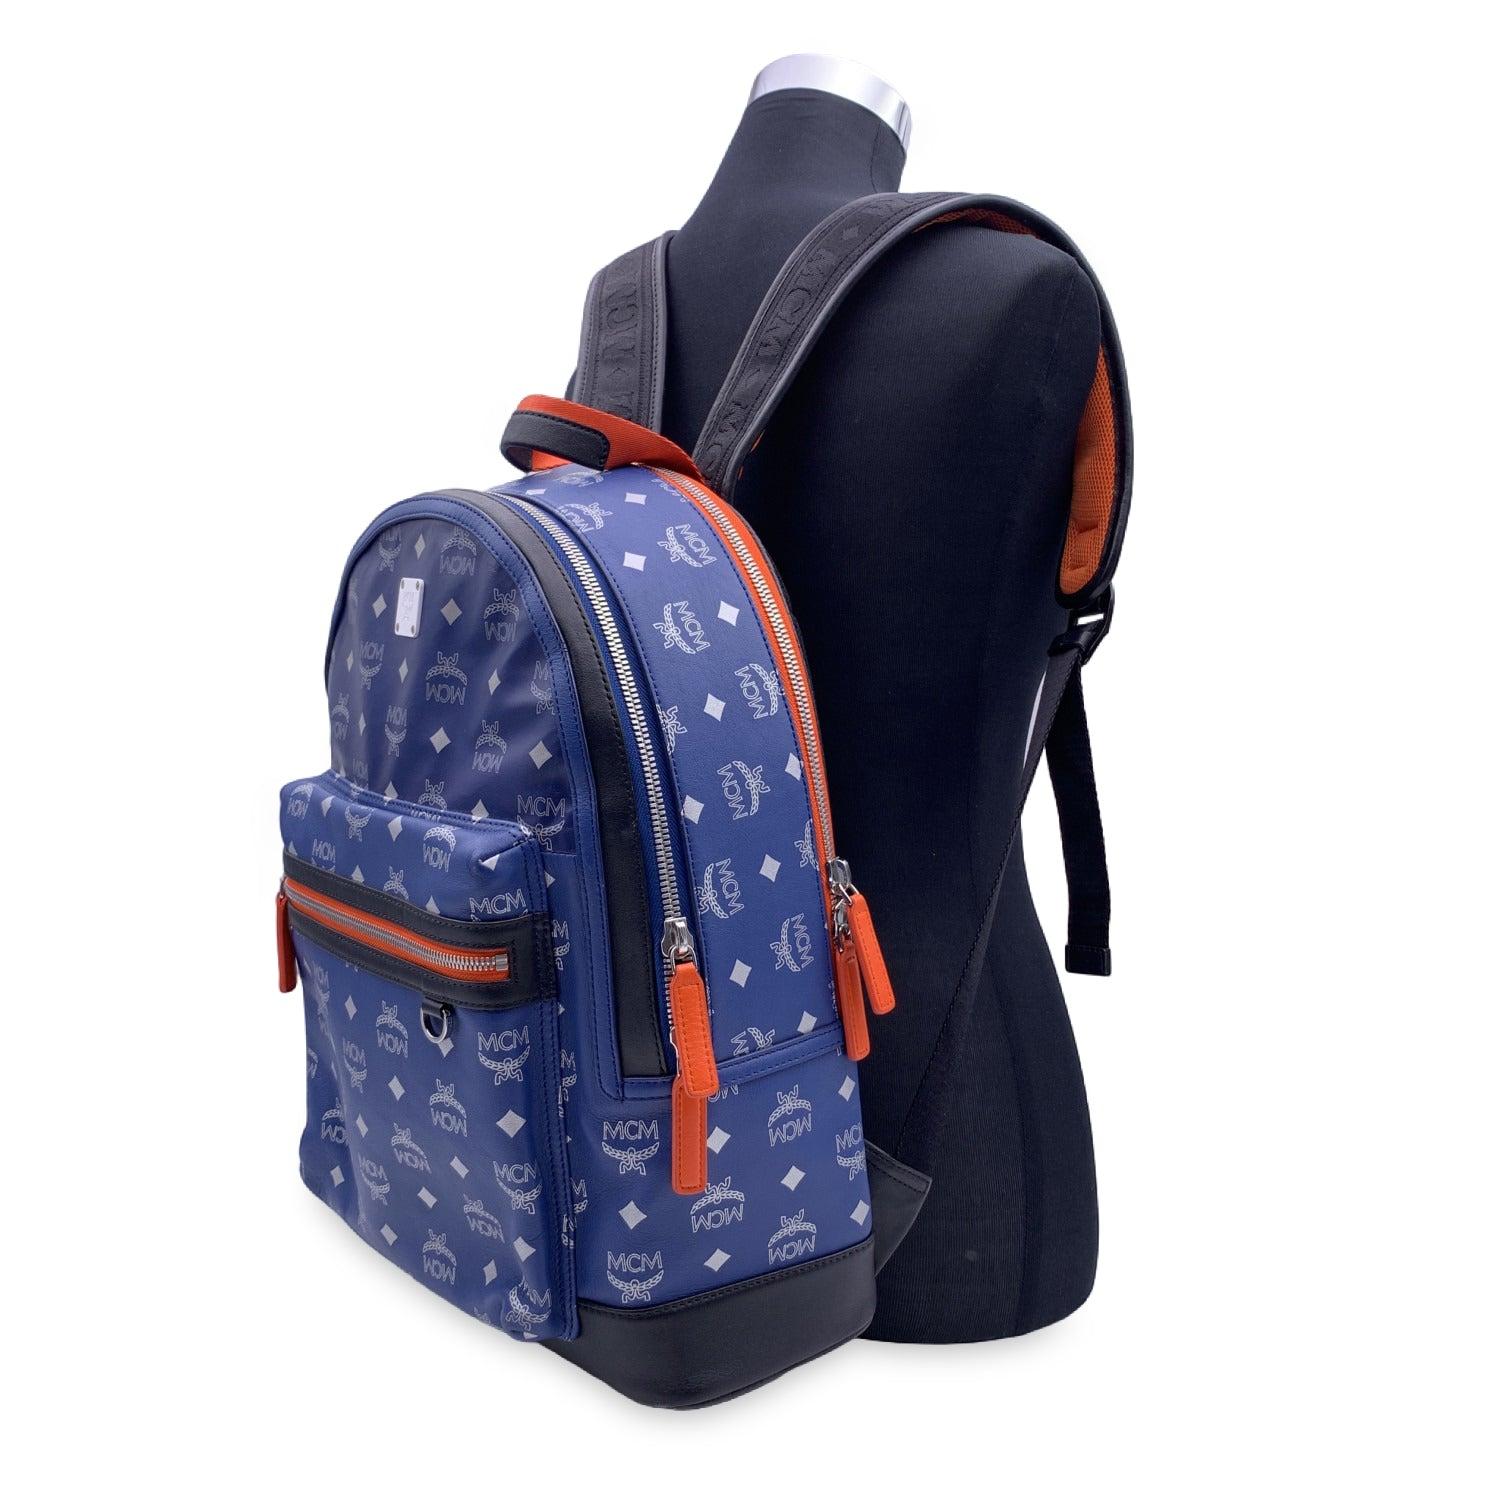 This beautiful Bag will come with a Certificate of Authenticity provided by Entrupy. The certificate will be provided at no further cost MCM Visetos Reflective Nylon Resnick Backpack in blue color with orange trim. Crafted in Monogram Visetos canvas